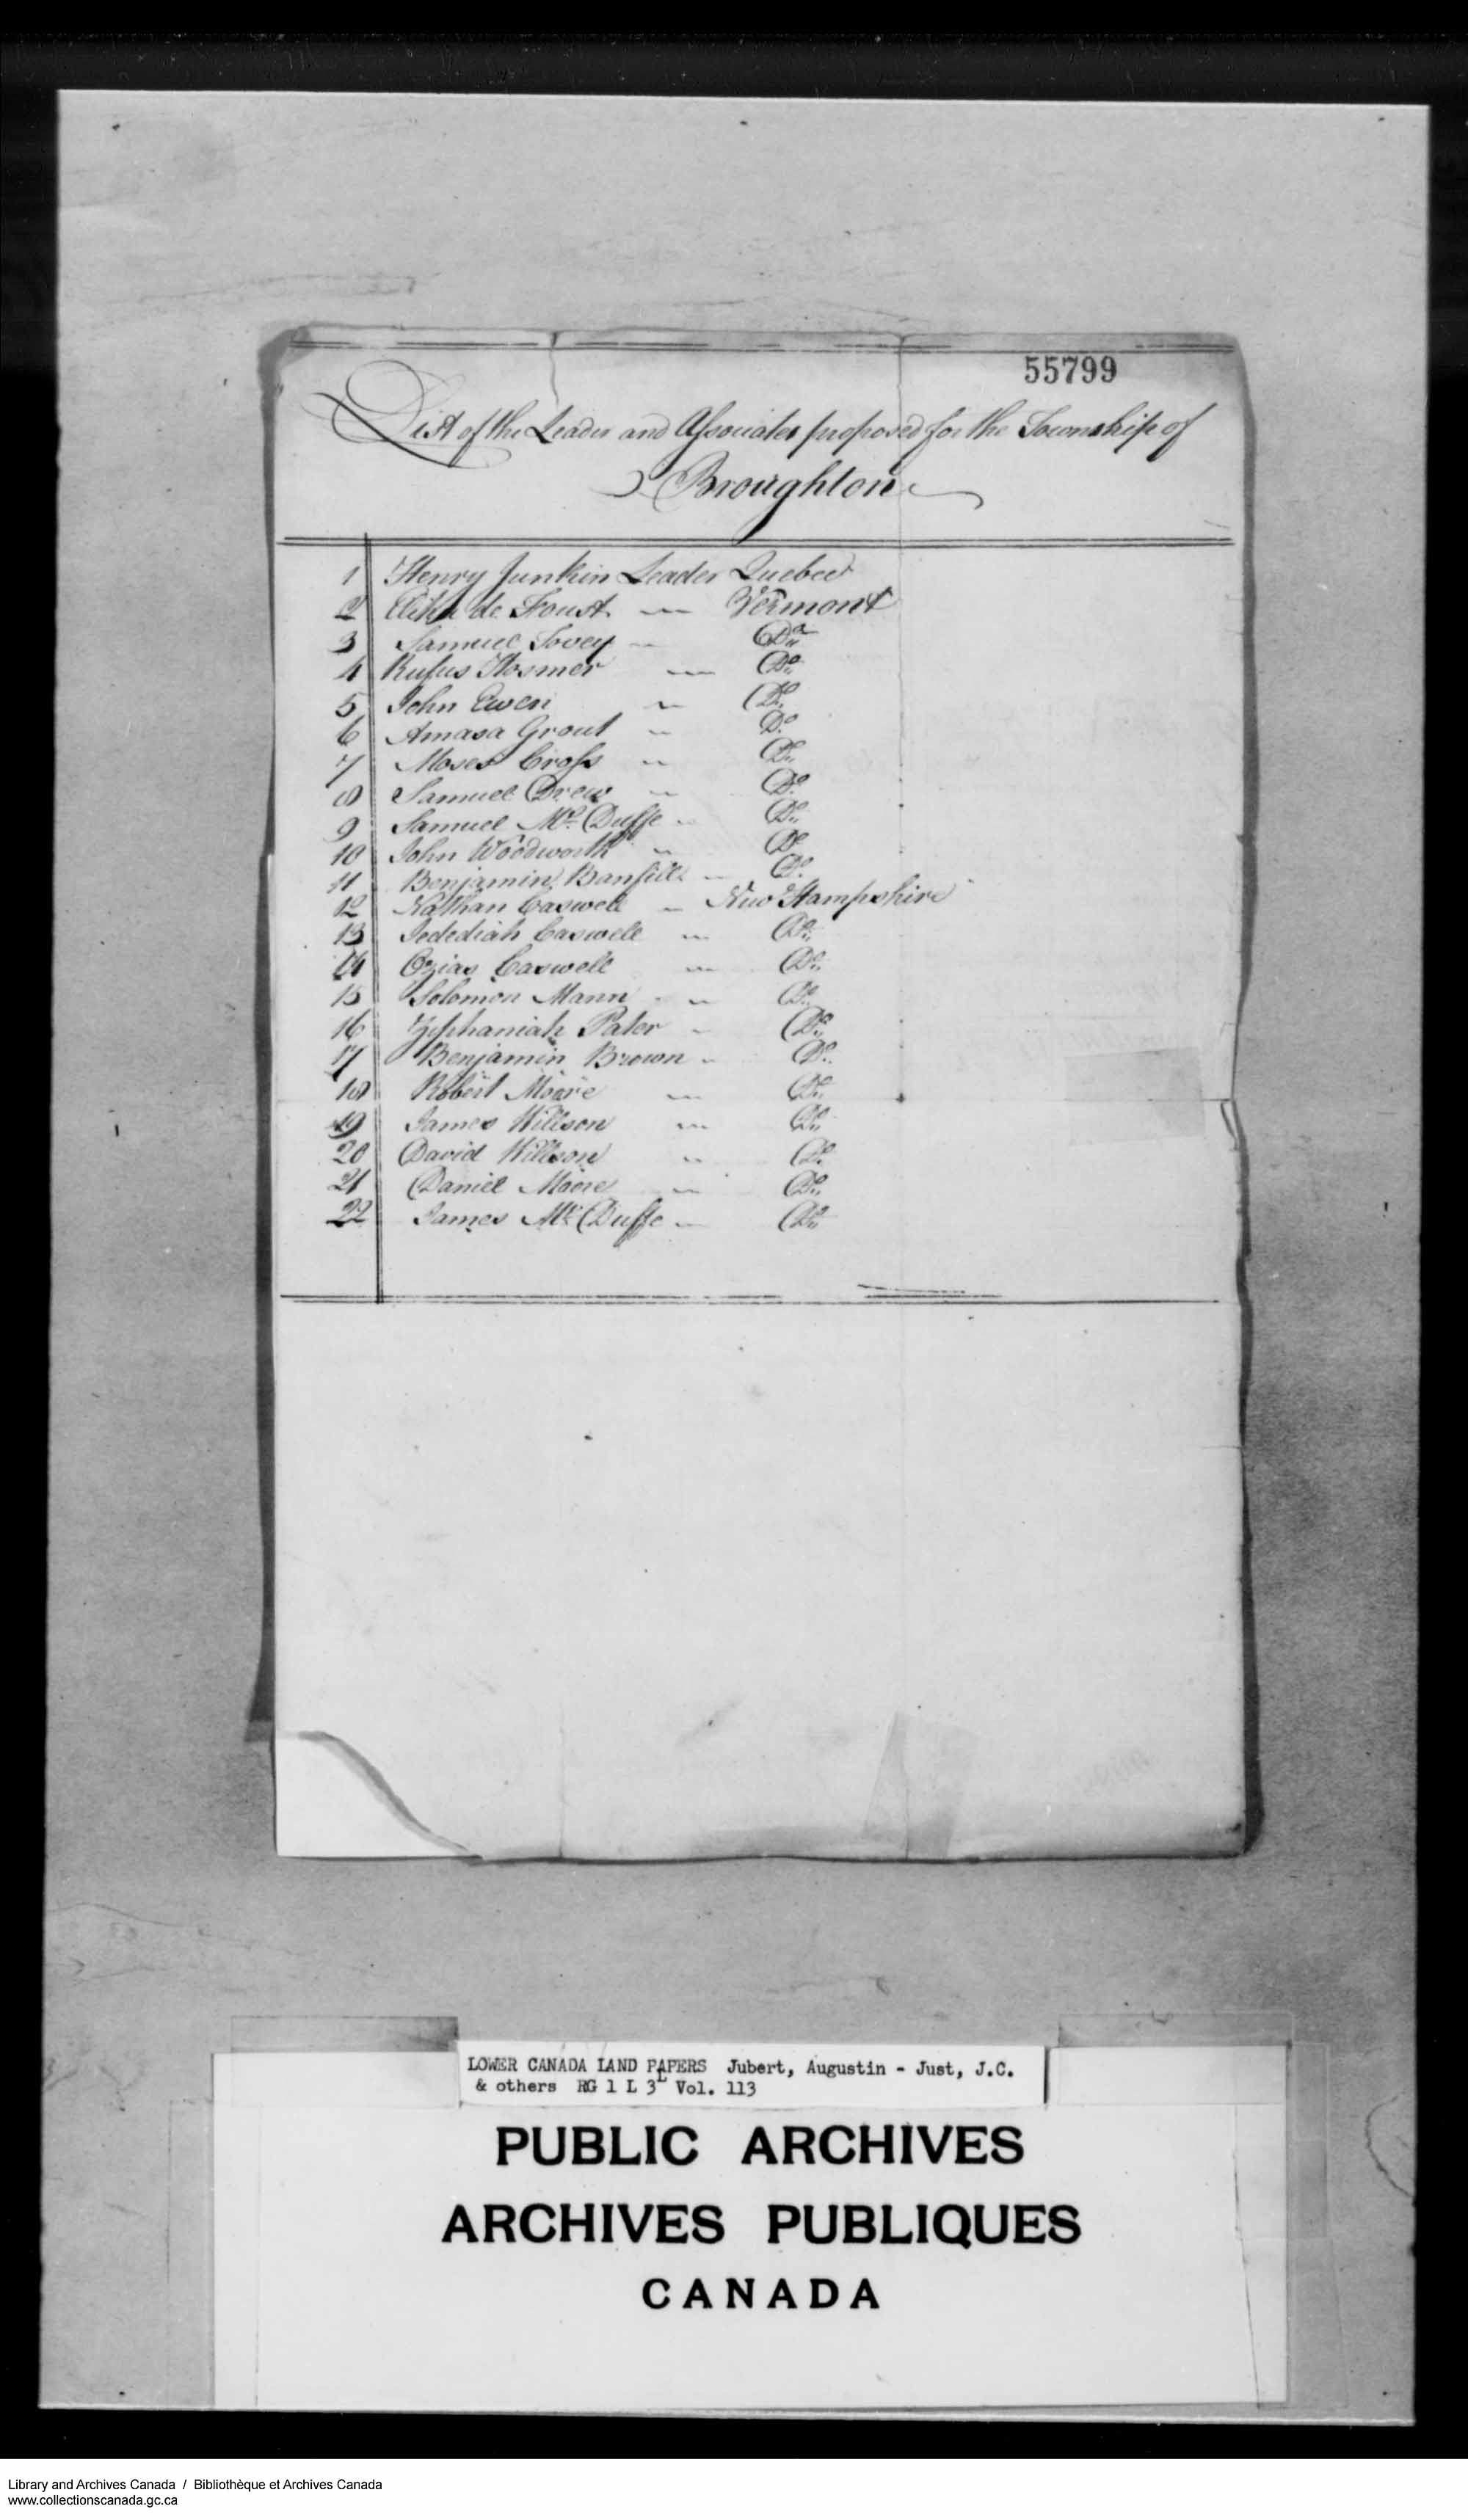 Digitized page of  for Image No.: e008700286